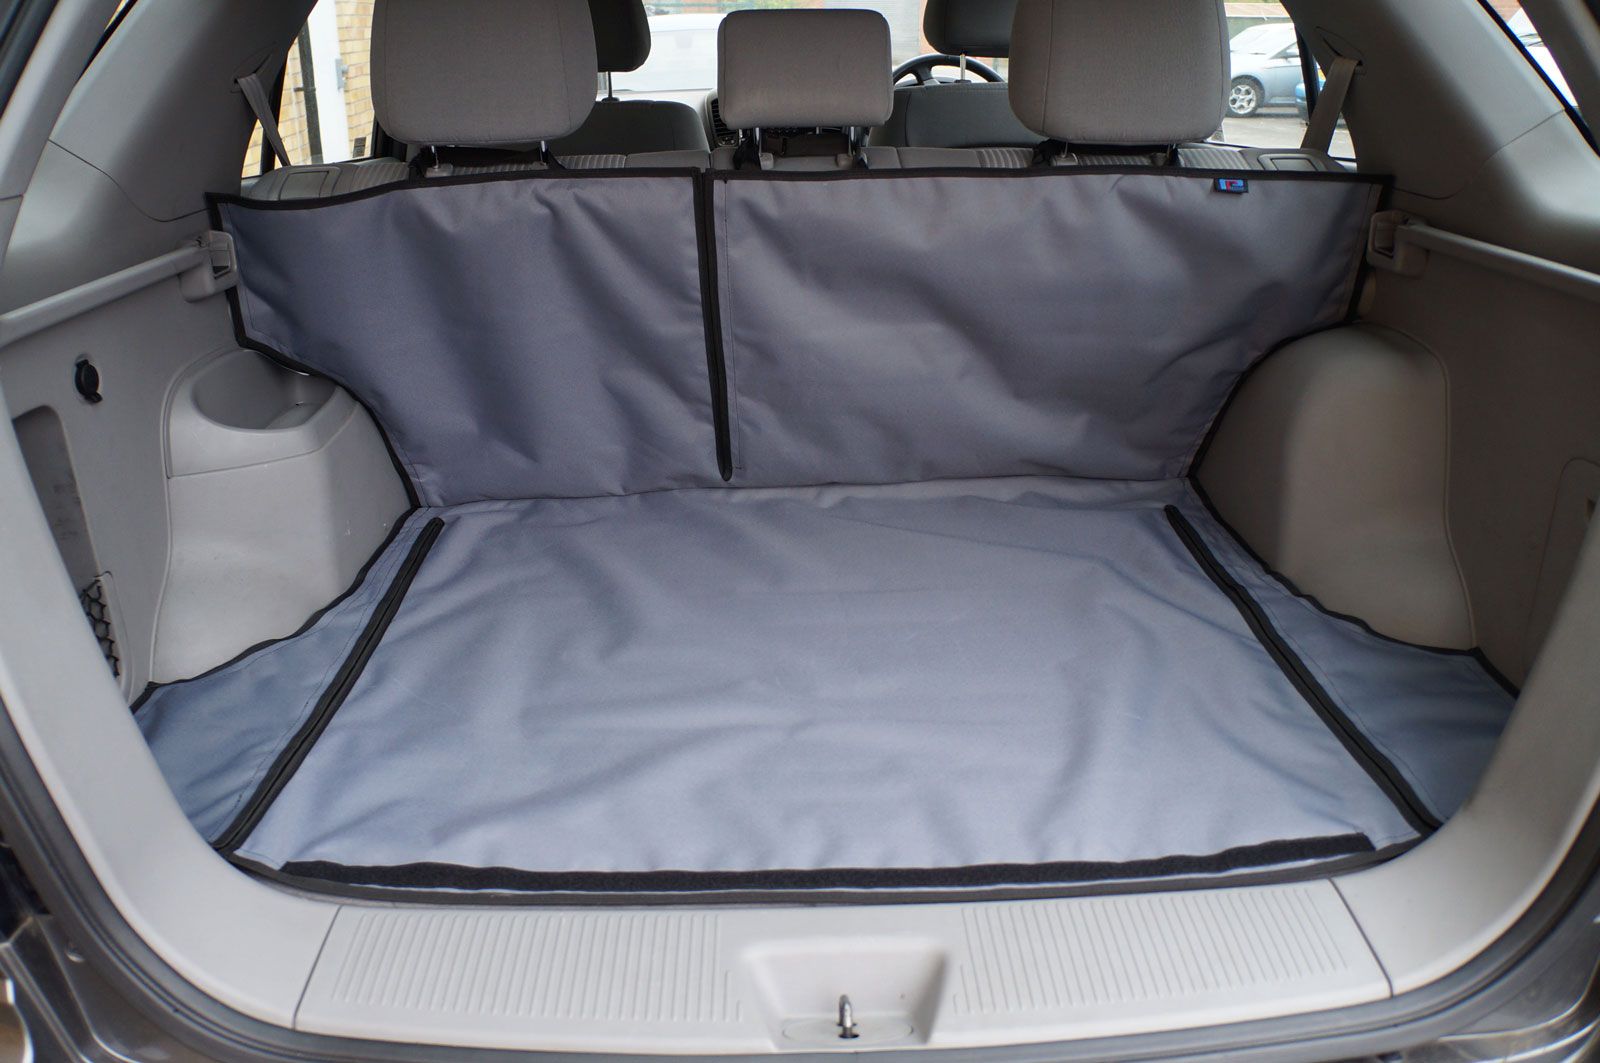 BMW X5 E70 (5 Seats) 2006 - 2013 Fully Tailored Load Liner without bumper flap - Example